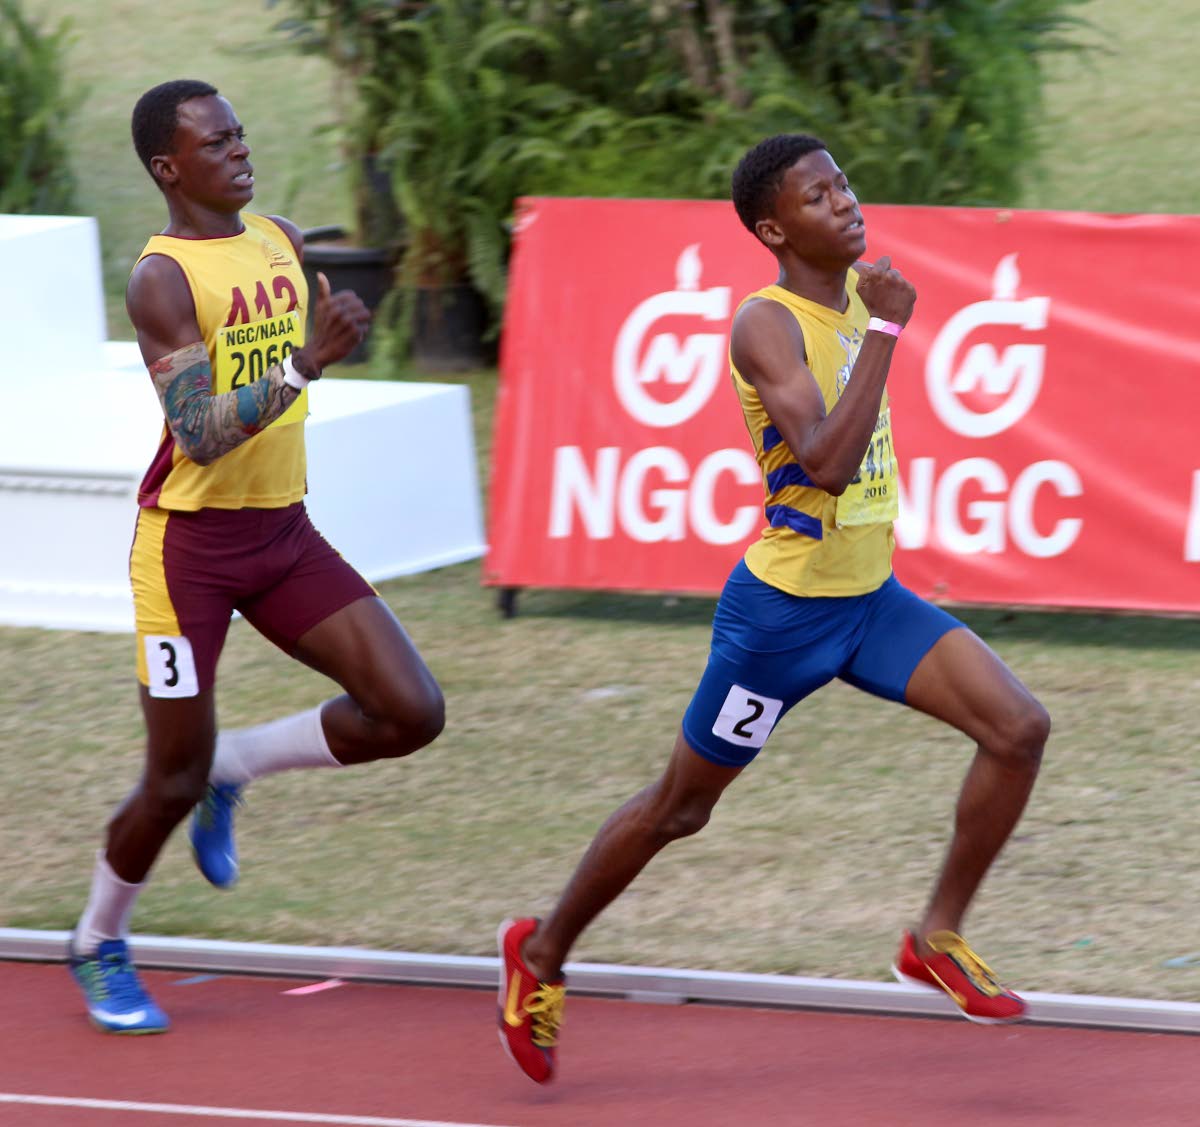 Mishak Peters, right, of Abilene Wildcats, wins the boys U17 800m final in a time of 2:03:54 secs, at the NGC/NAAA Jr Championships, Hasely Crawford Stadium, Port of Spain, yesterday.